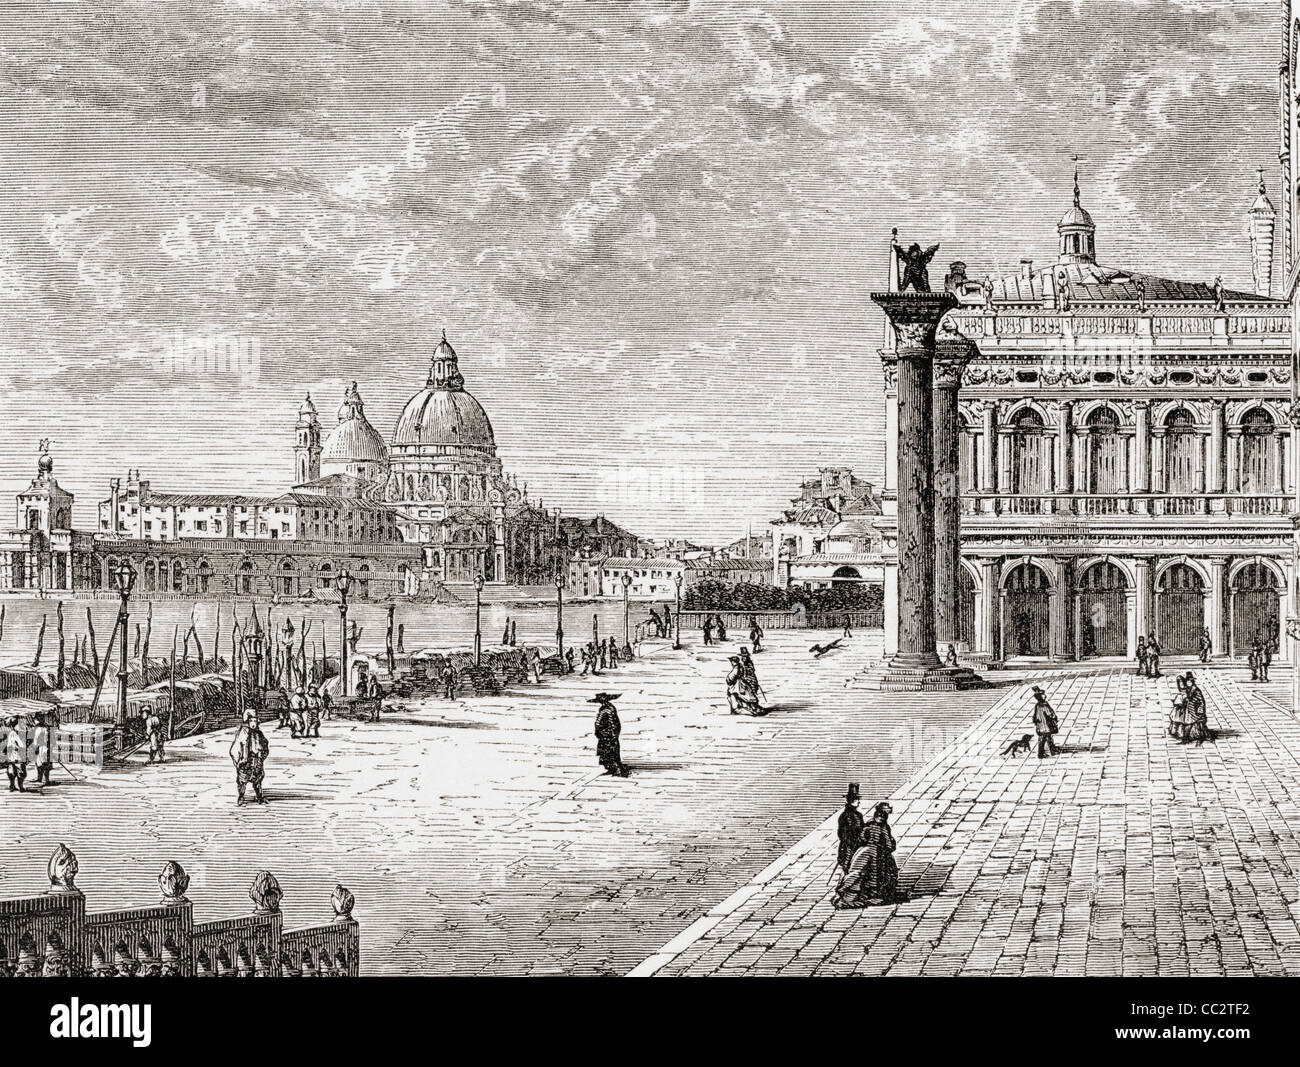 Piazza San Marco or St Mark's Square,Venice, Italy in the late 19th century. Stock Photo